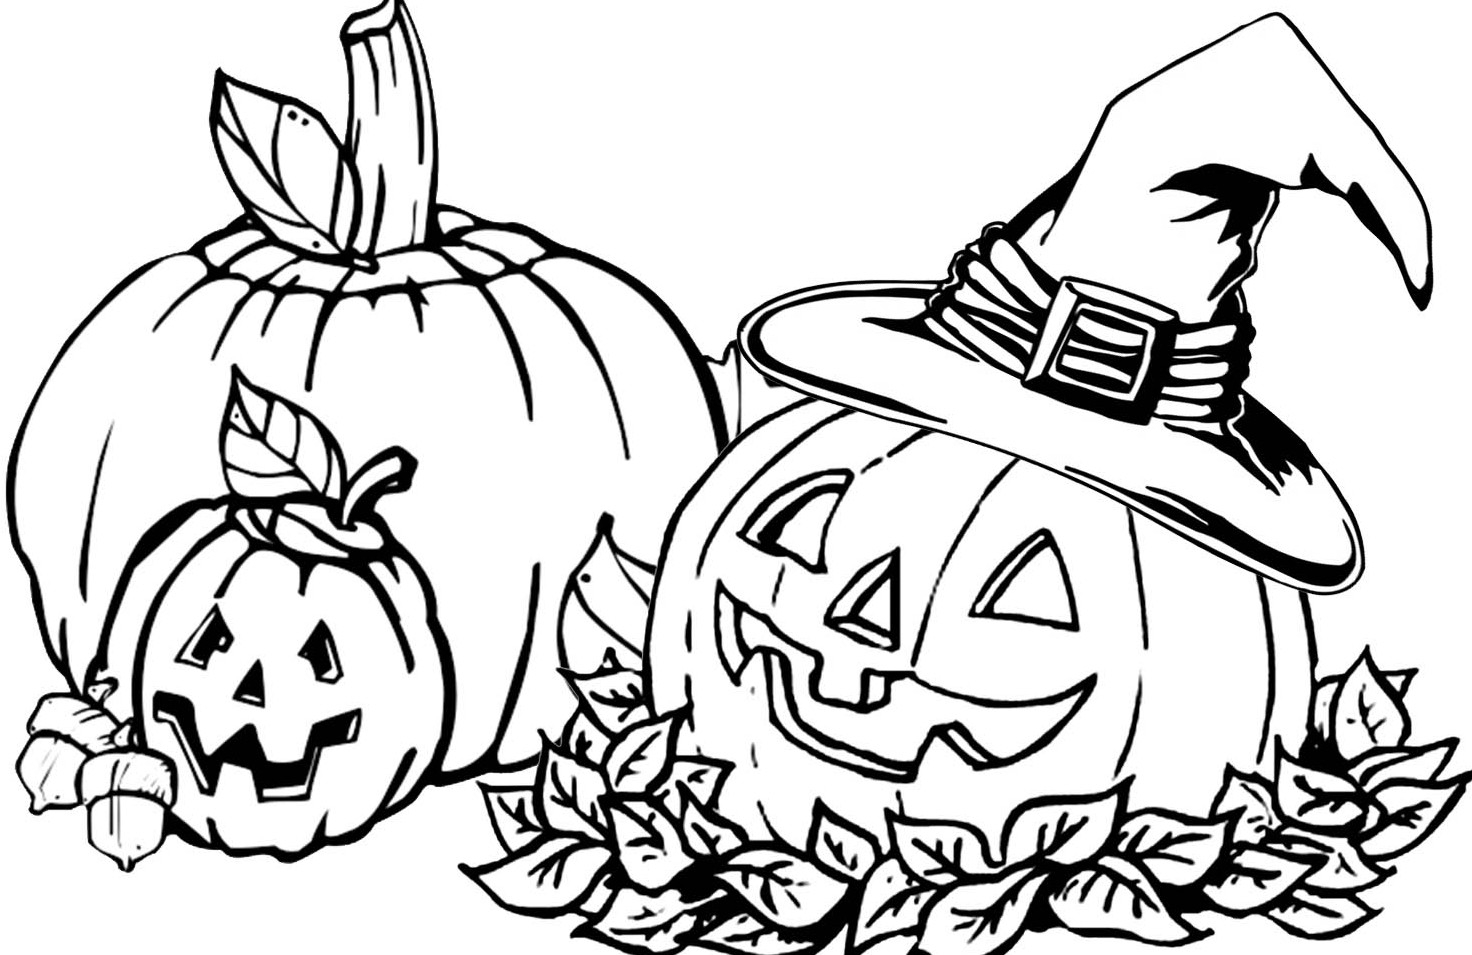 Halloween Pumpkin Coloring Pages Printables Coloring Pages Halloween Fall Pumpkin Coloring Full Size Of Color